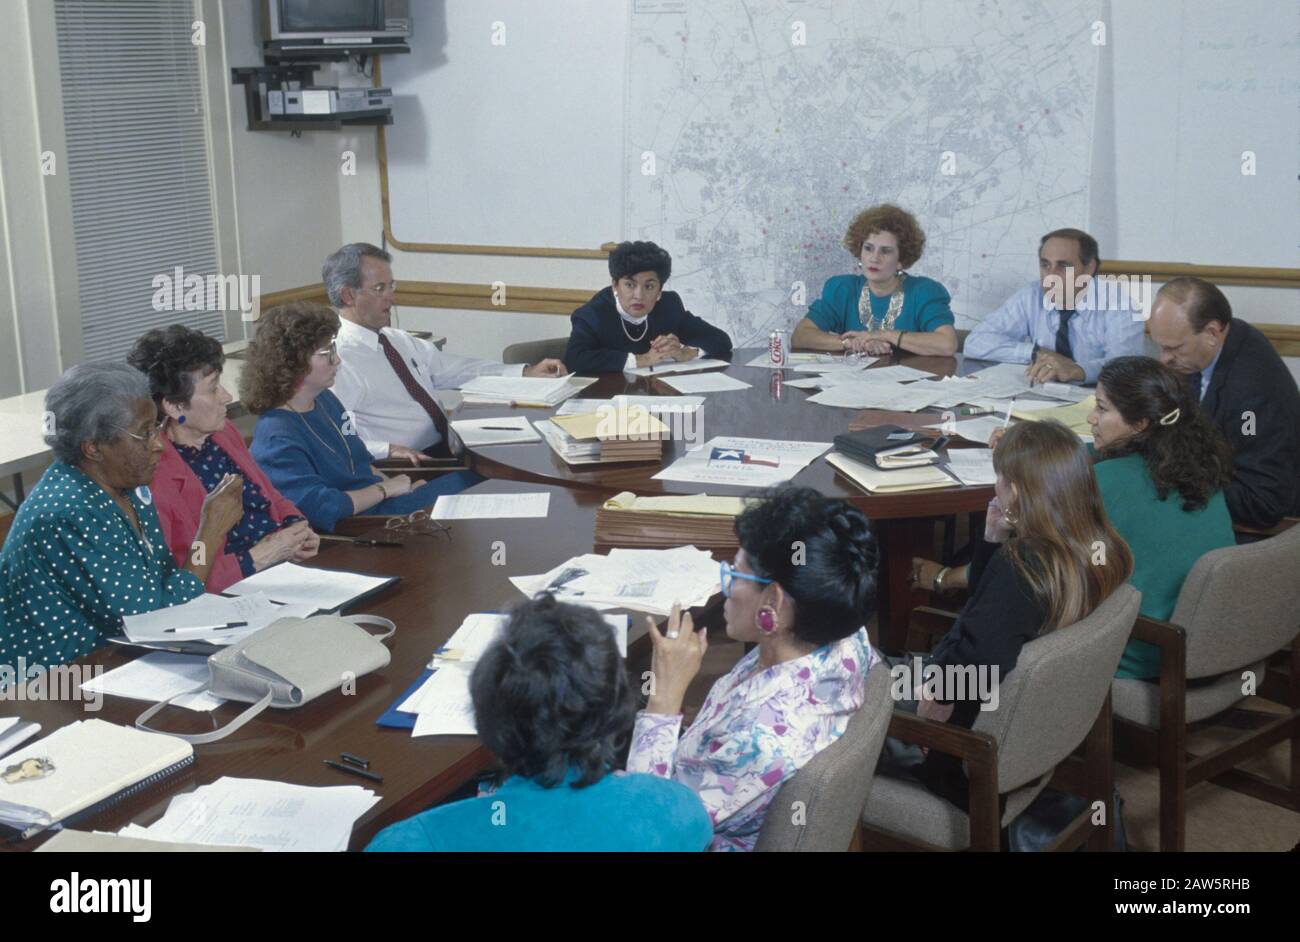 Members of the 1990 United States census Complete Count Committee meet in San Antonio, Texas, to discuss raising awareness among and motivate residents to participate in the upcoming count. Stock Photo